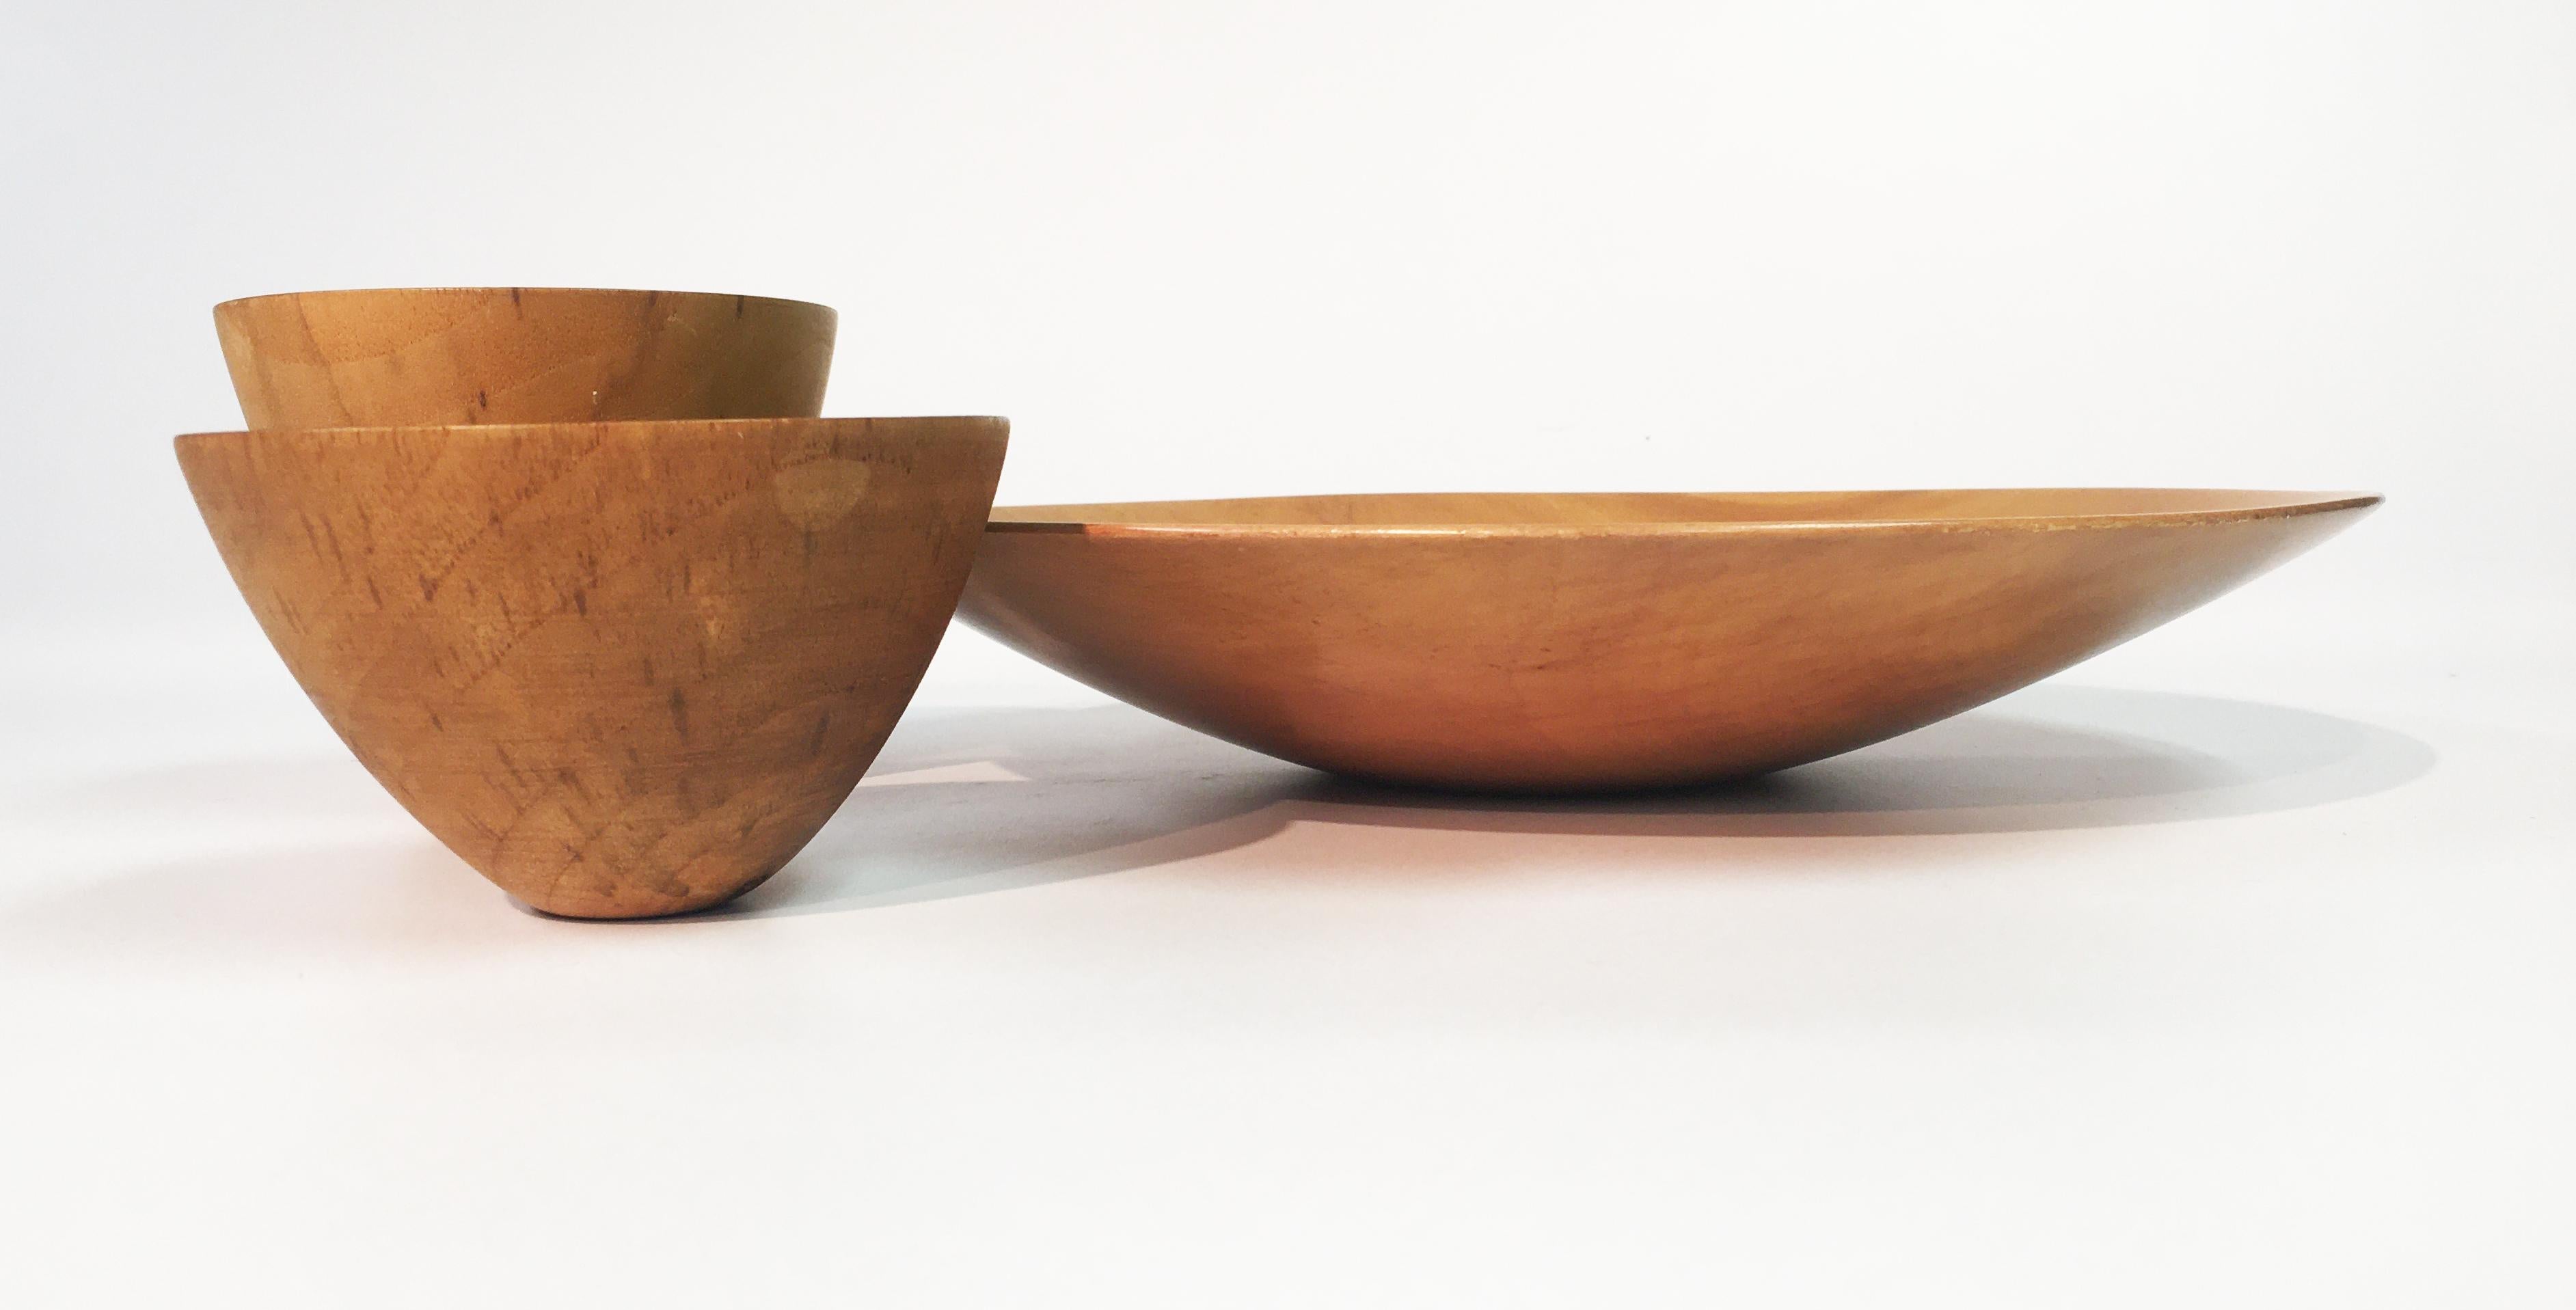 James Prestini : Grouping of Turned Wooden Bowls - Sculpture by James L. Prestini